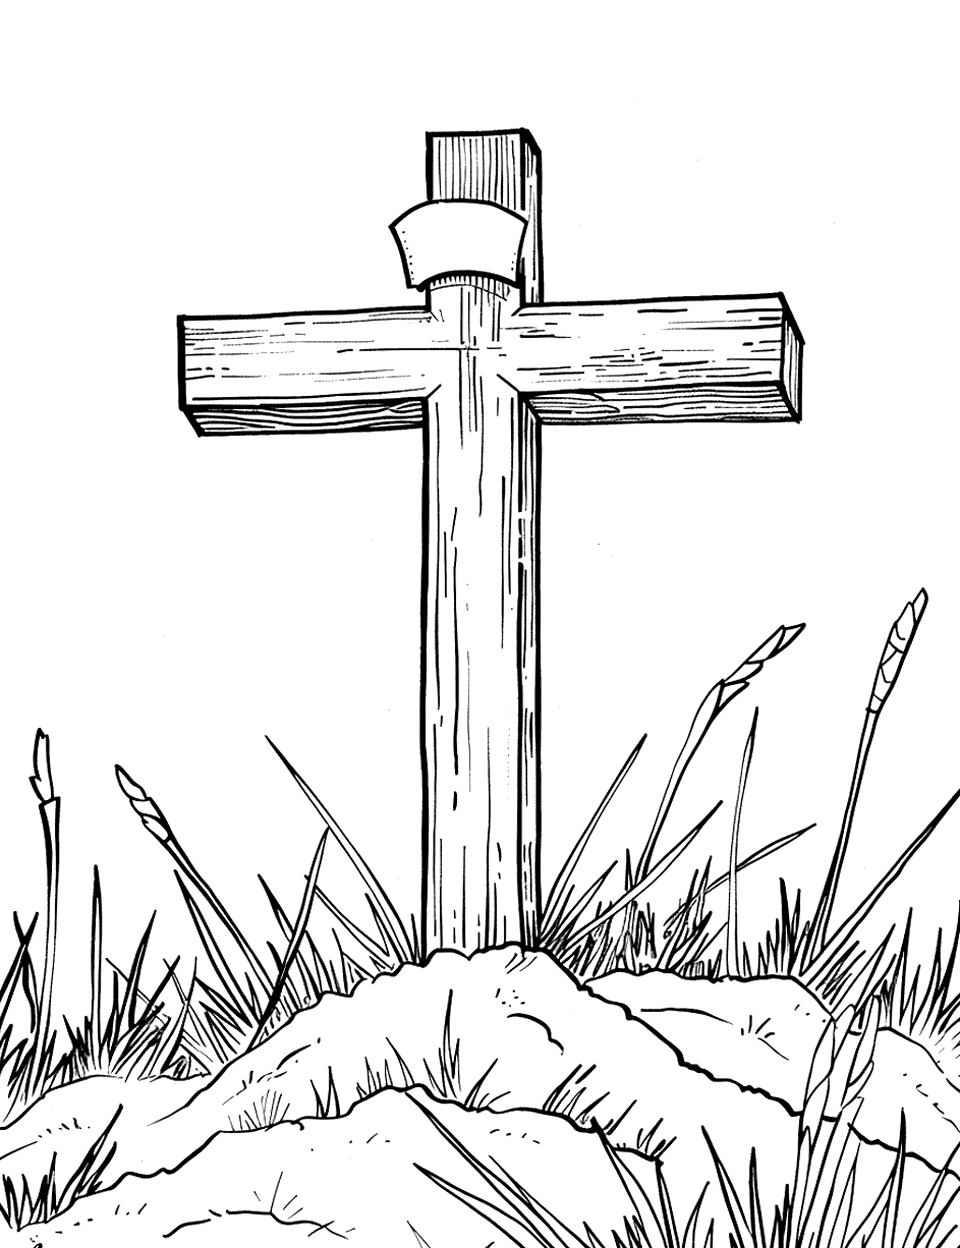 Holy Cross on a Hill Coloring Page - A large cross standing on a grassy hill under a clear sky.